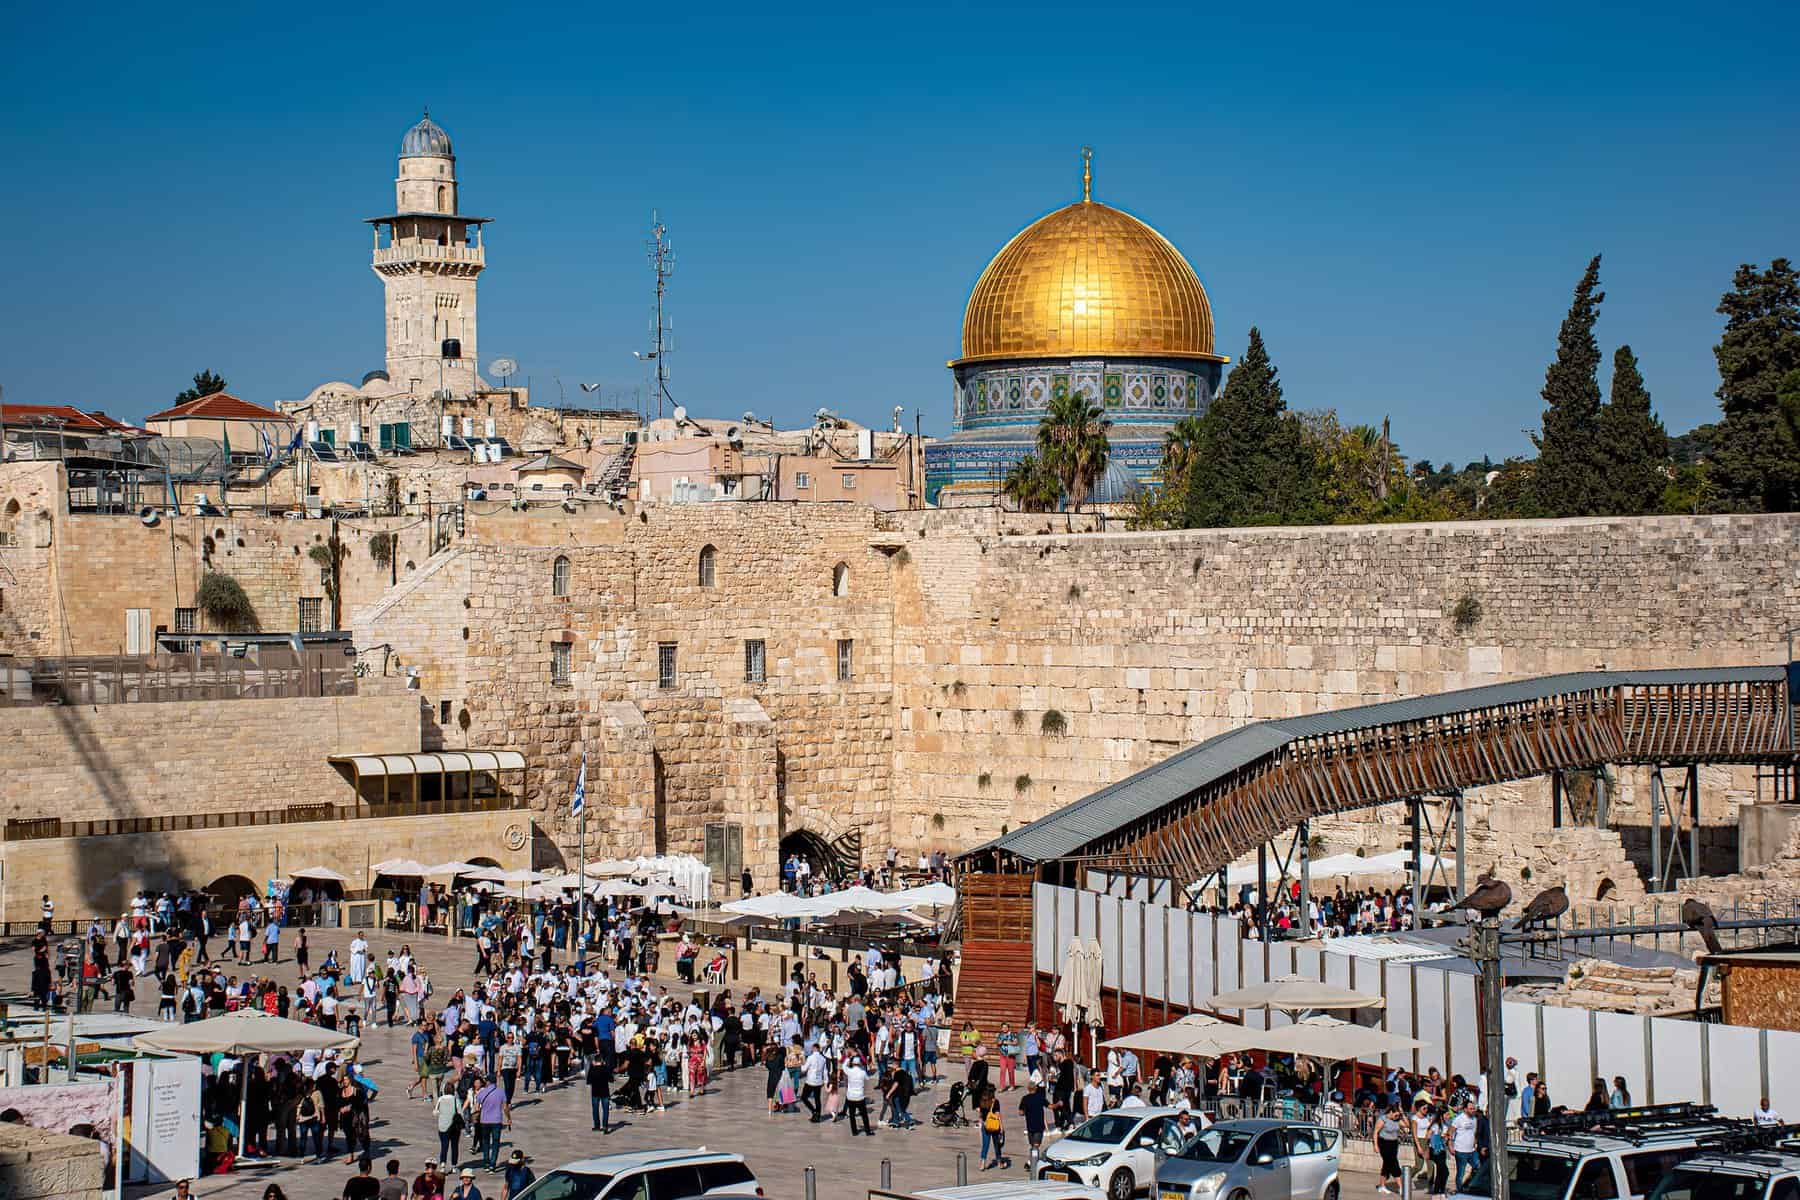 Image shows a street view of Jerusalem with the Dome of the Rock in the distance.